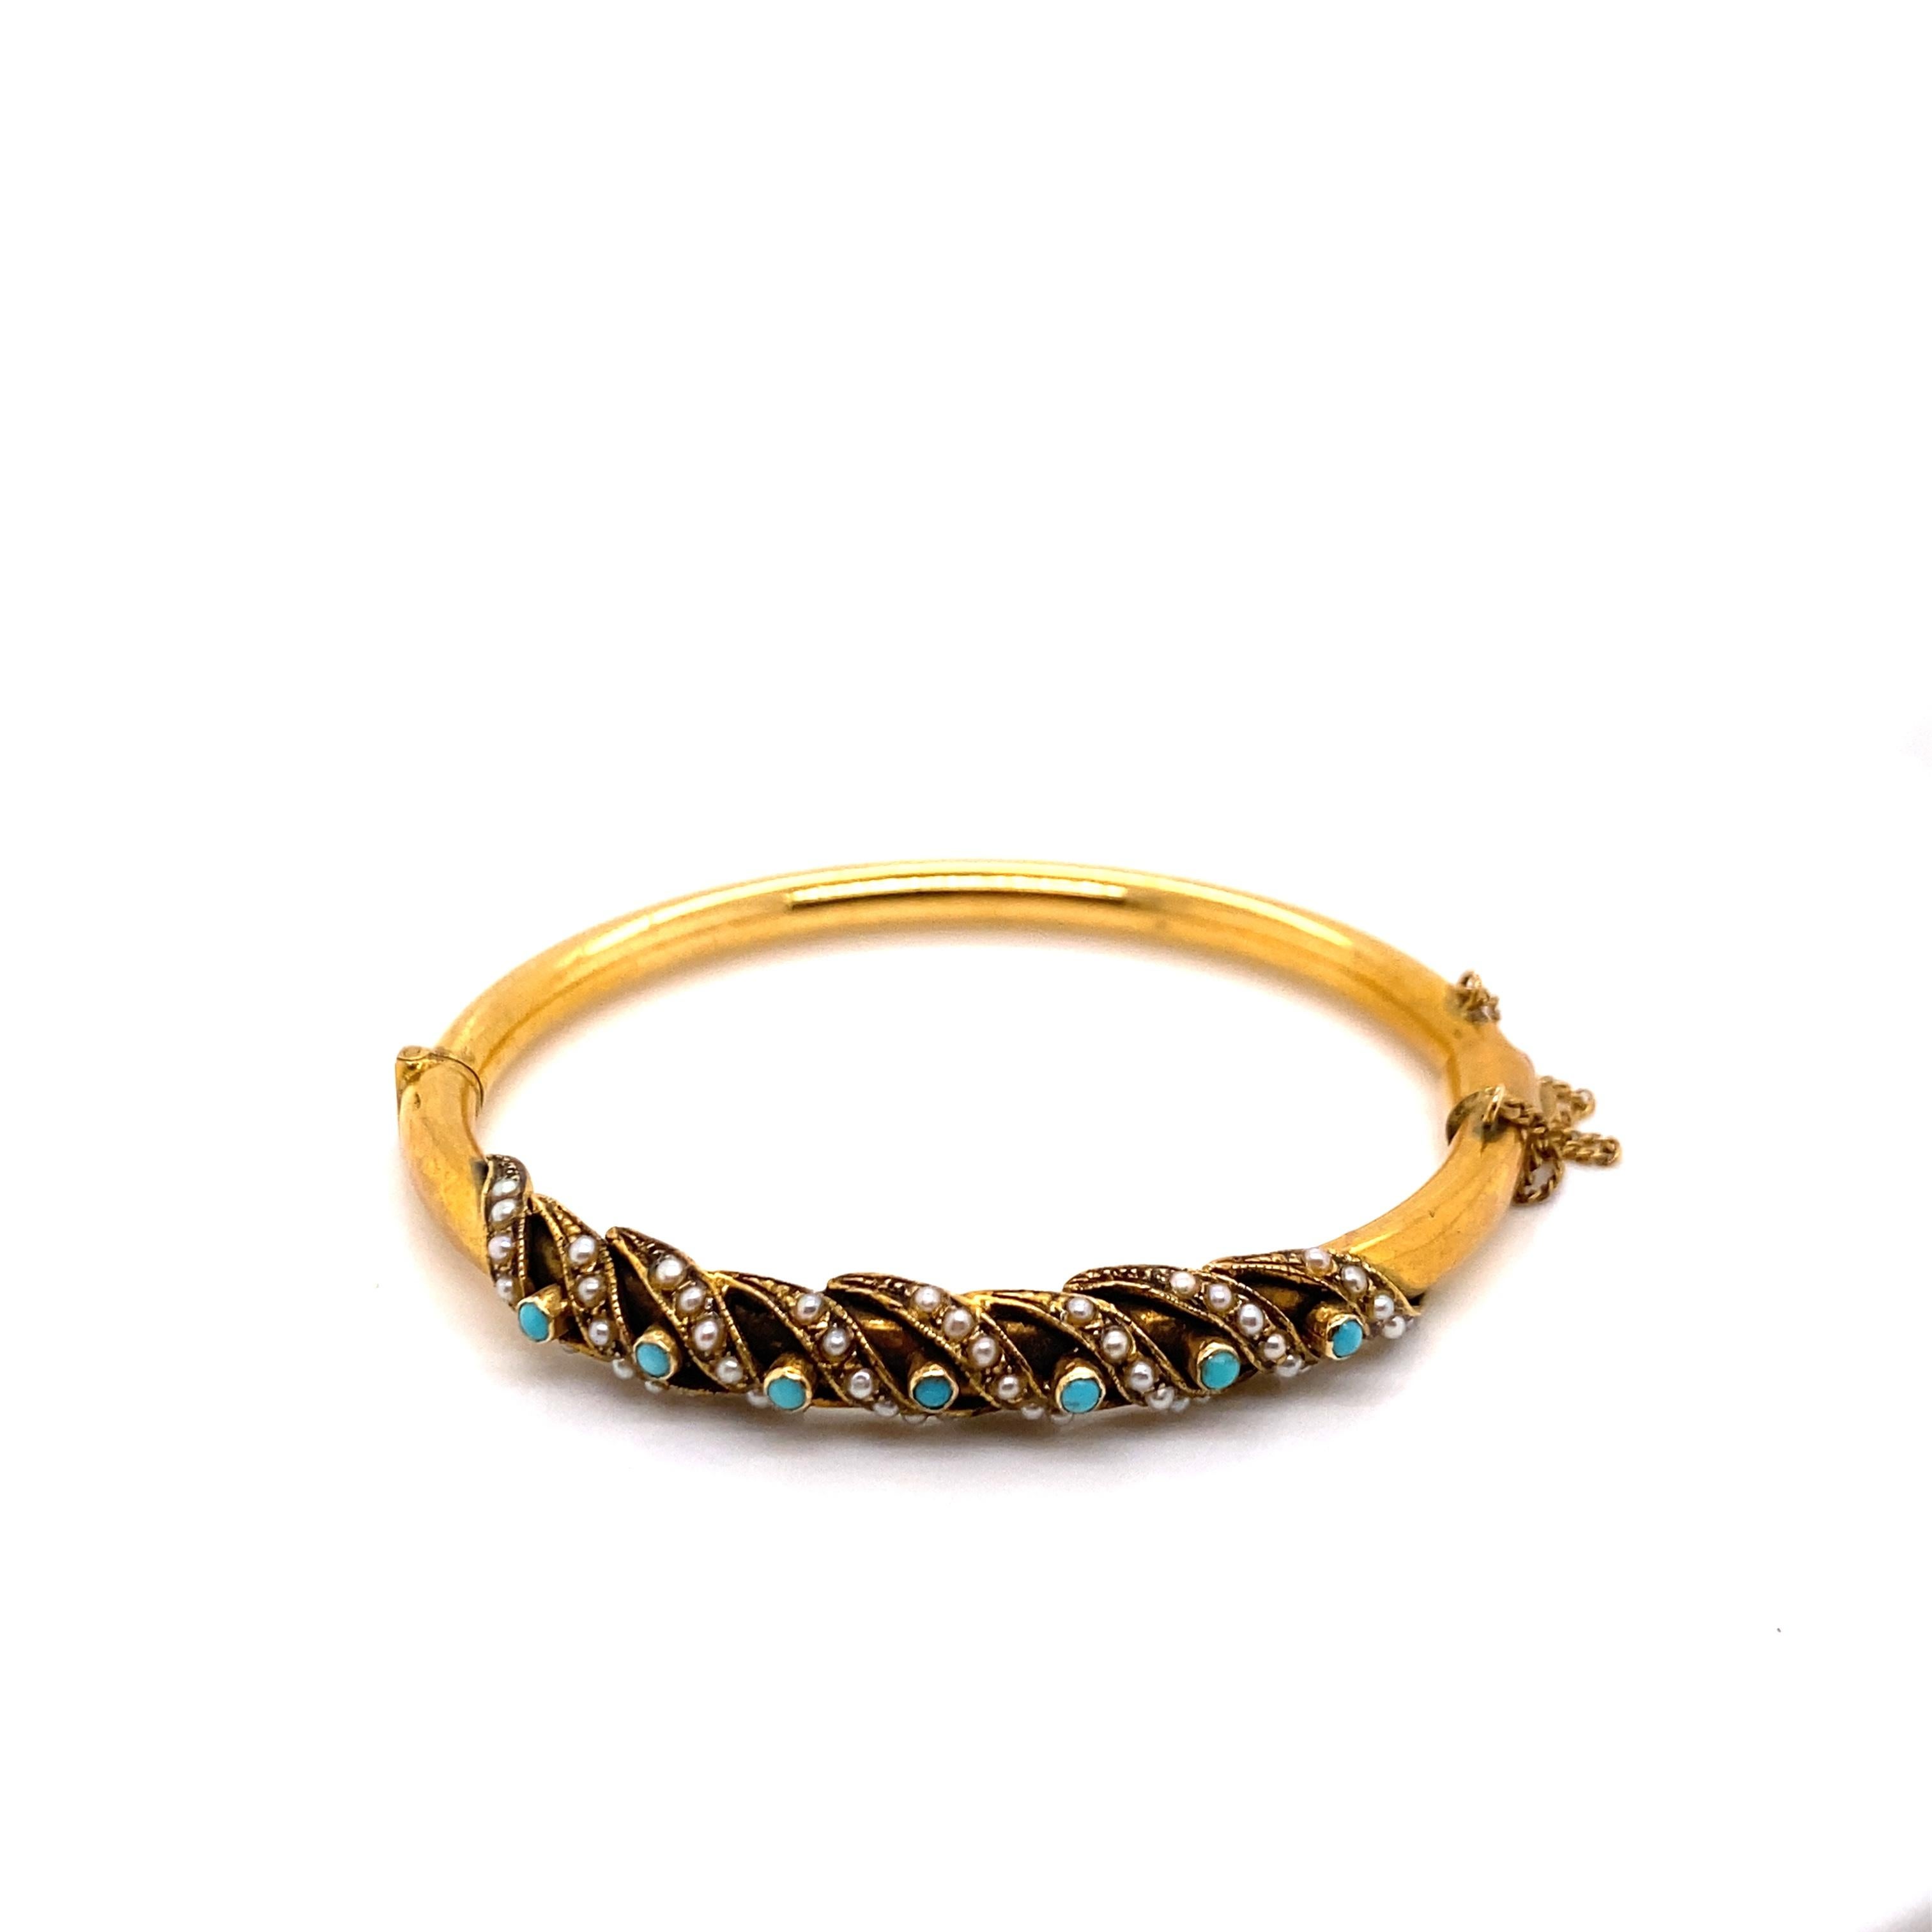 Retro Vintage 1970's 14K Yellow Gold Bangle Bracelet with Turquoise and Seed Pearls For Sale